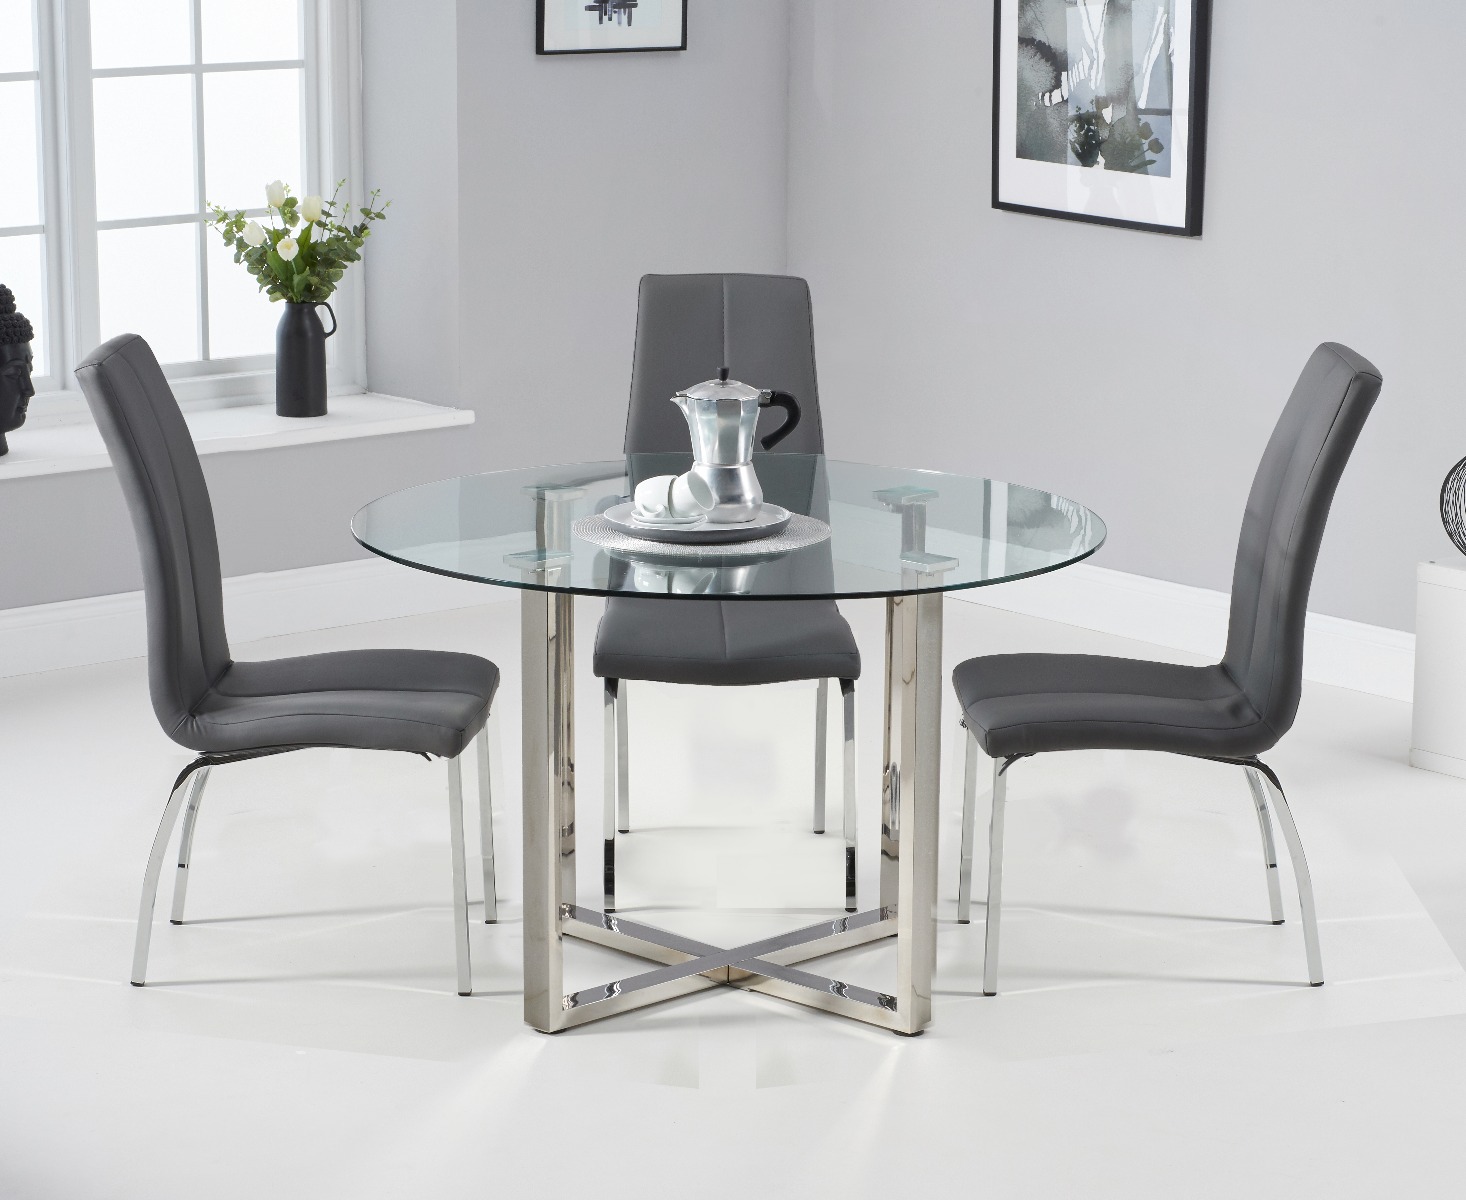 Vaso 120cm Round Glass Dining Table With 4 Ivory White Marco Chairs